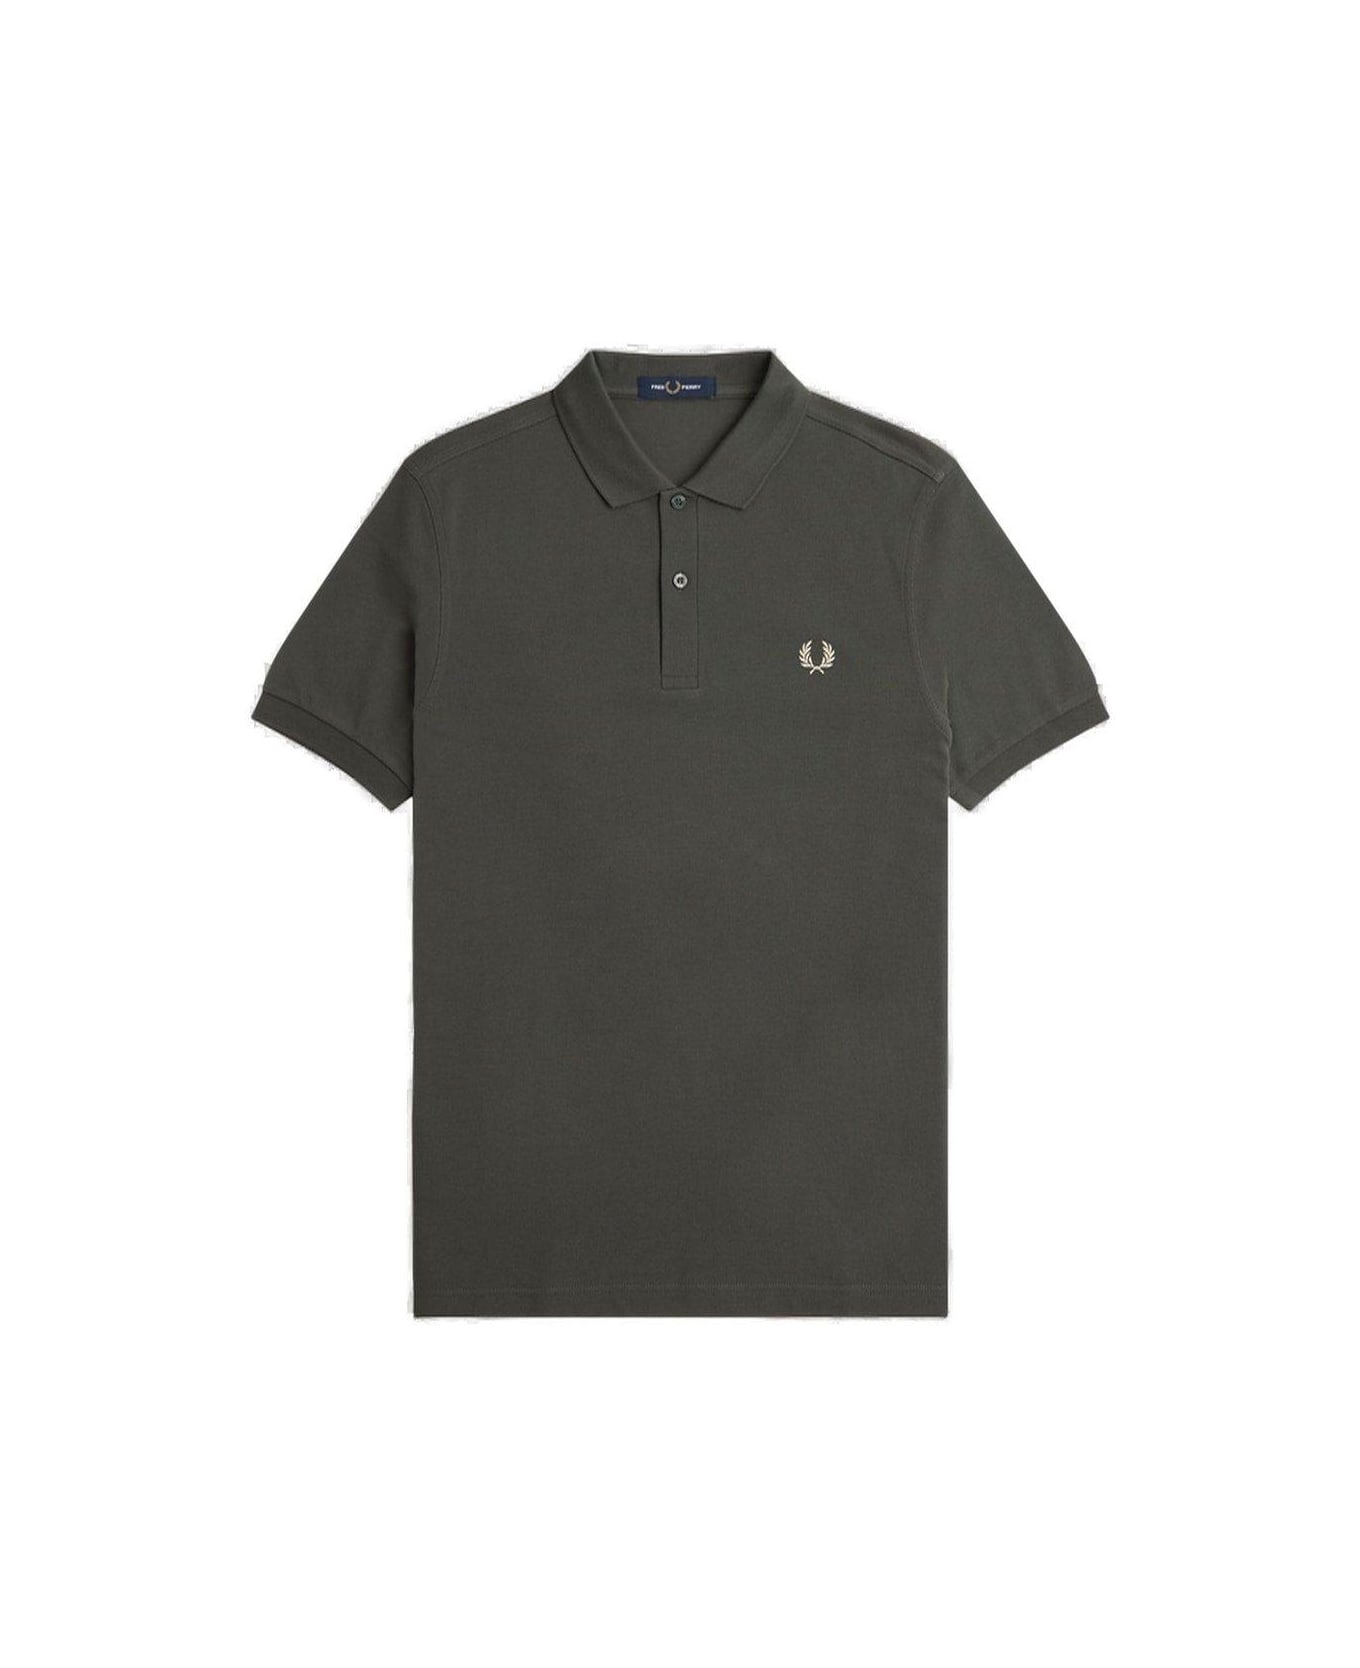 Fred Perry Laurel Wreath-embroidered Short-sleeved Polo Shirt - Fieldgreen/oatme